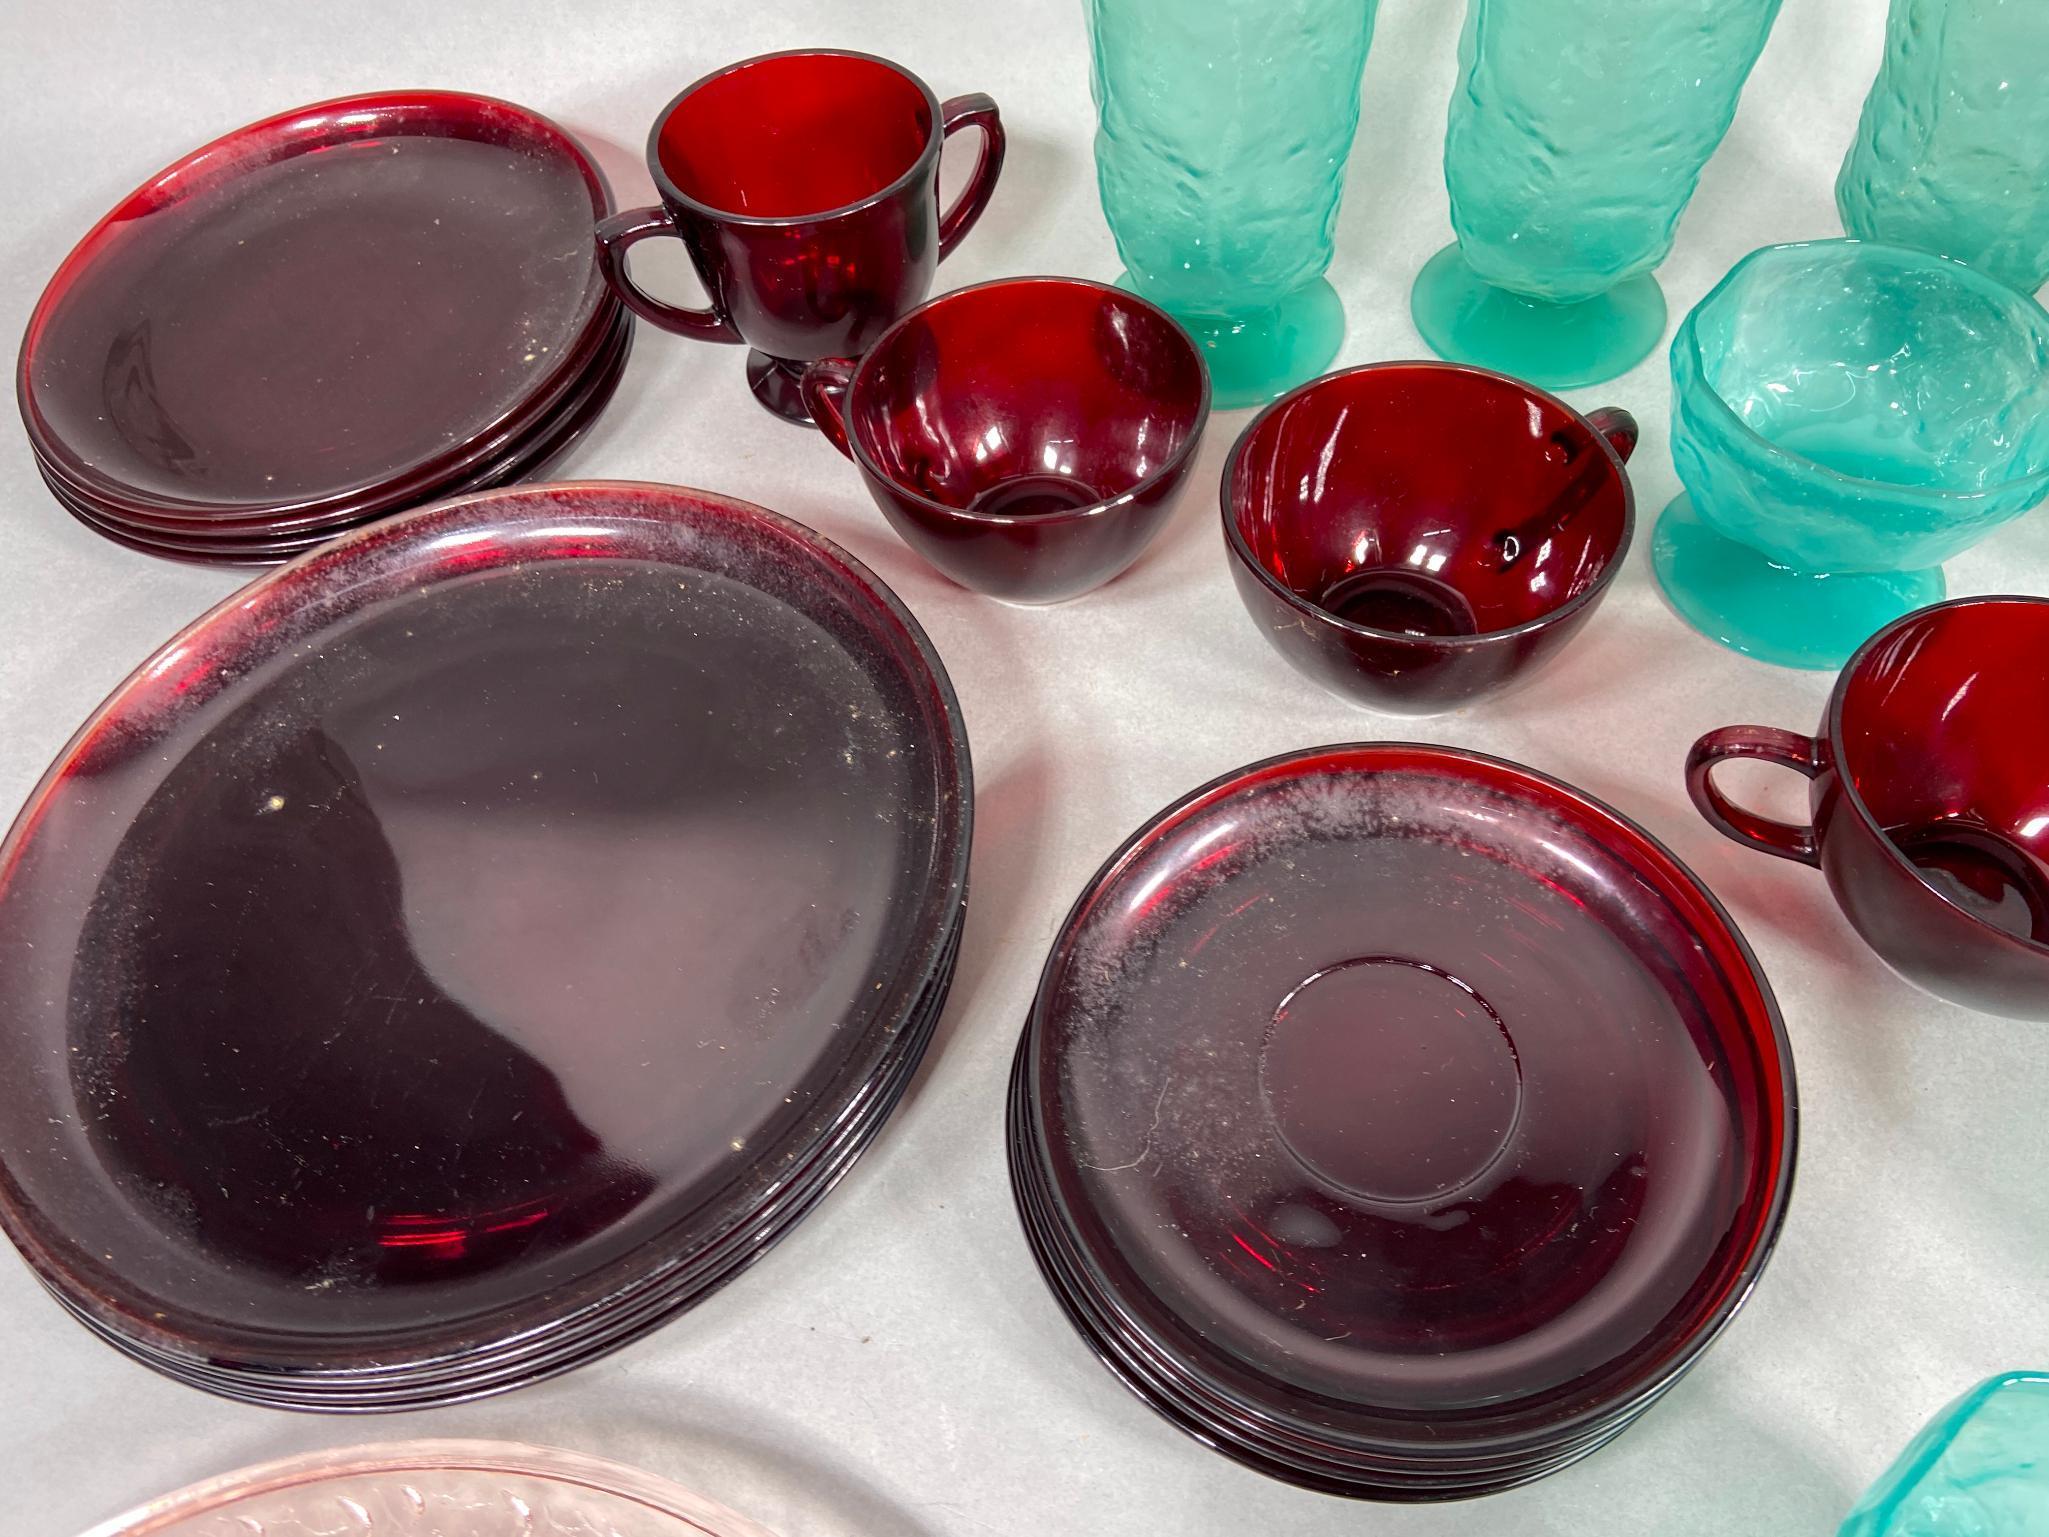 Lot of Glassware including Plates, Bowls, Cups and More